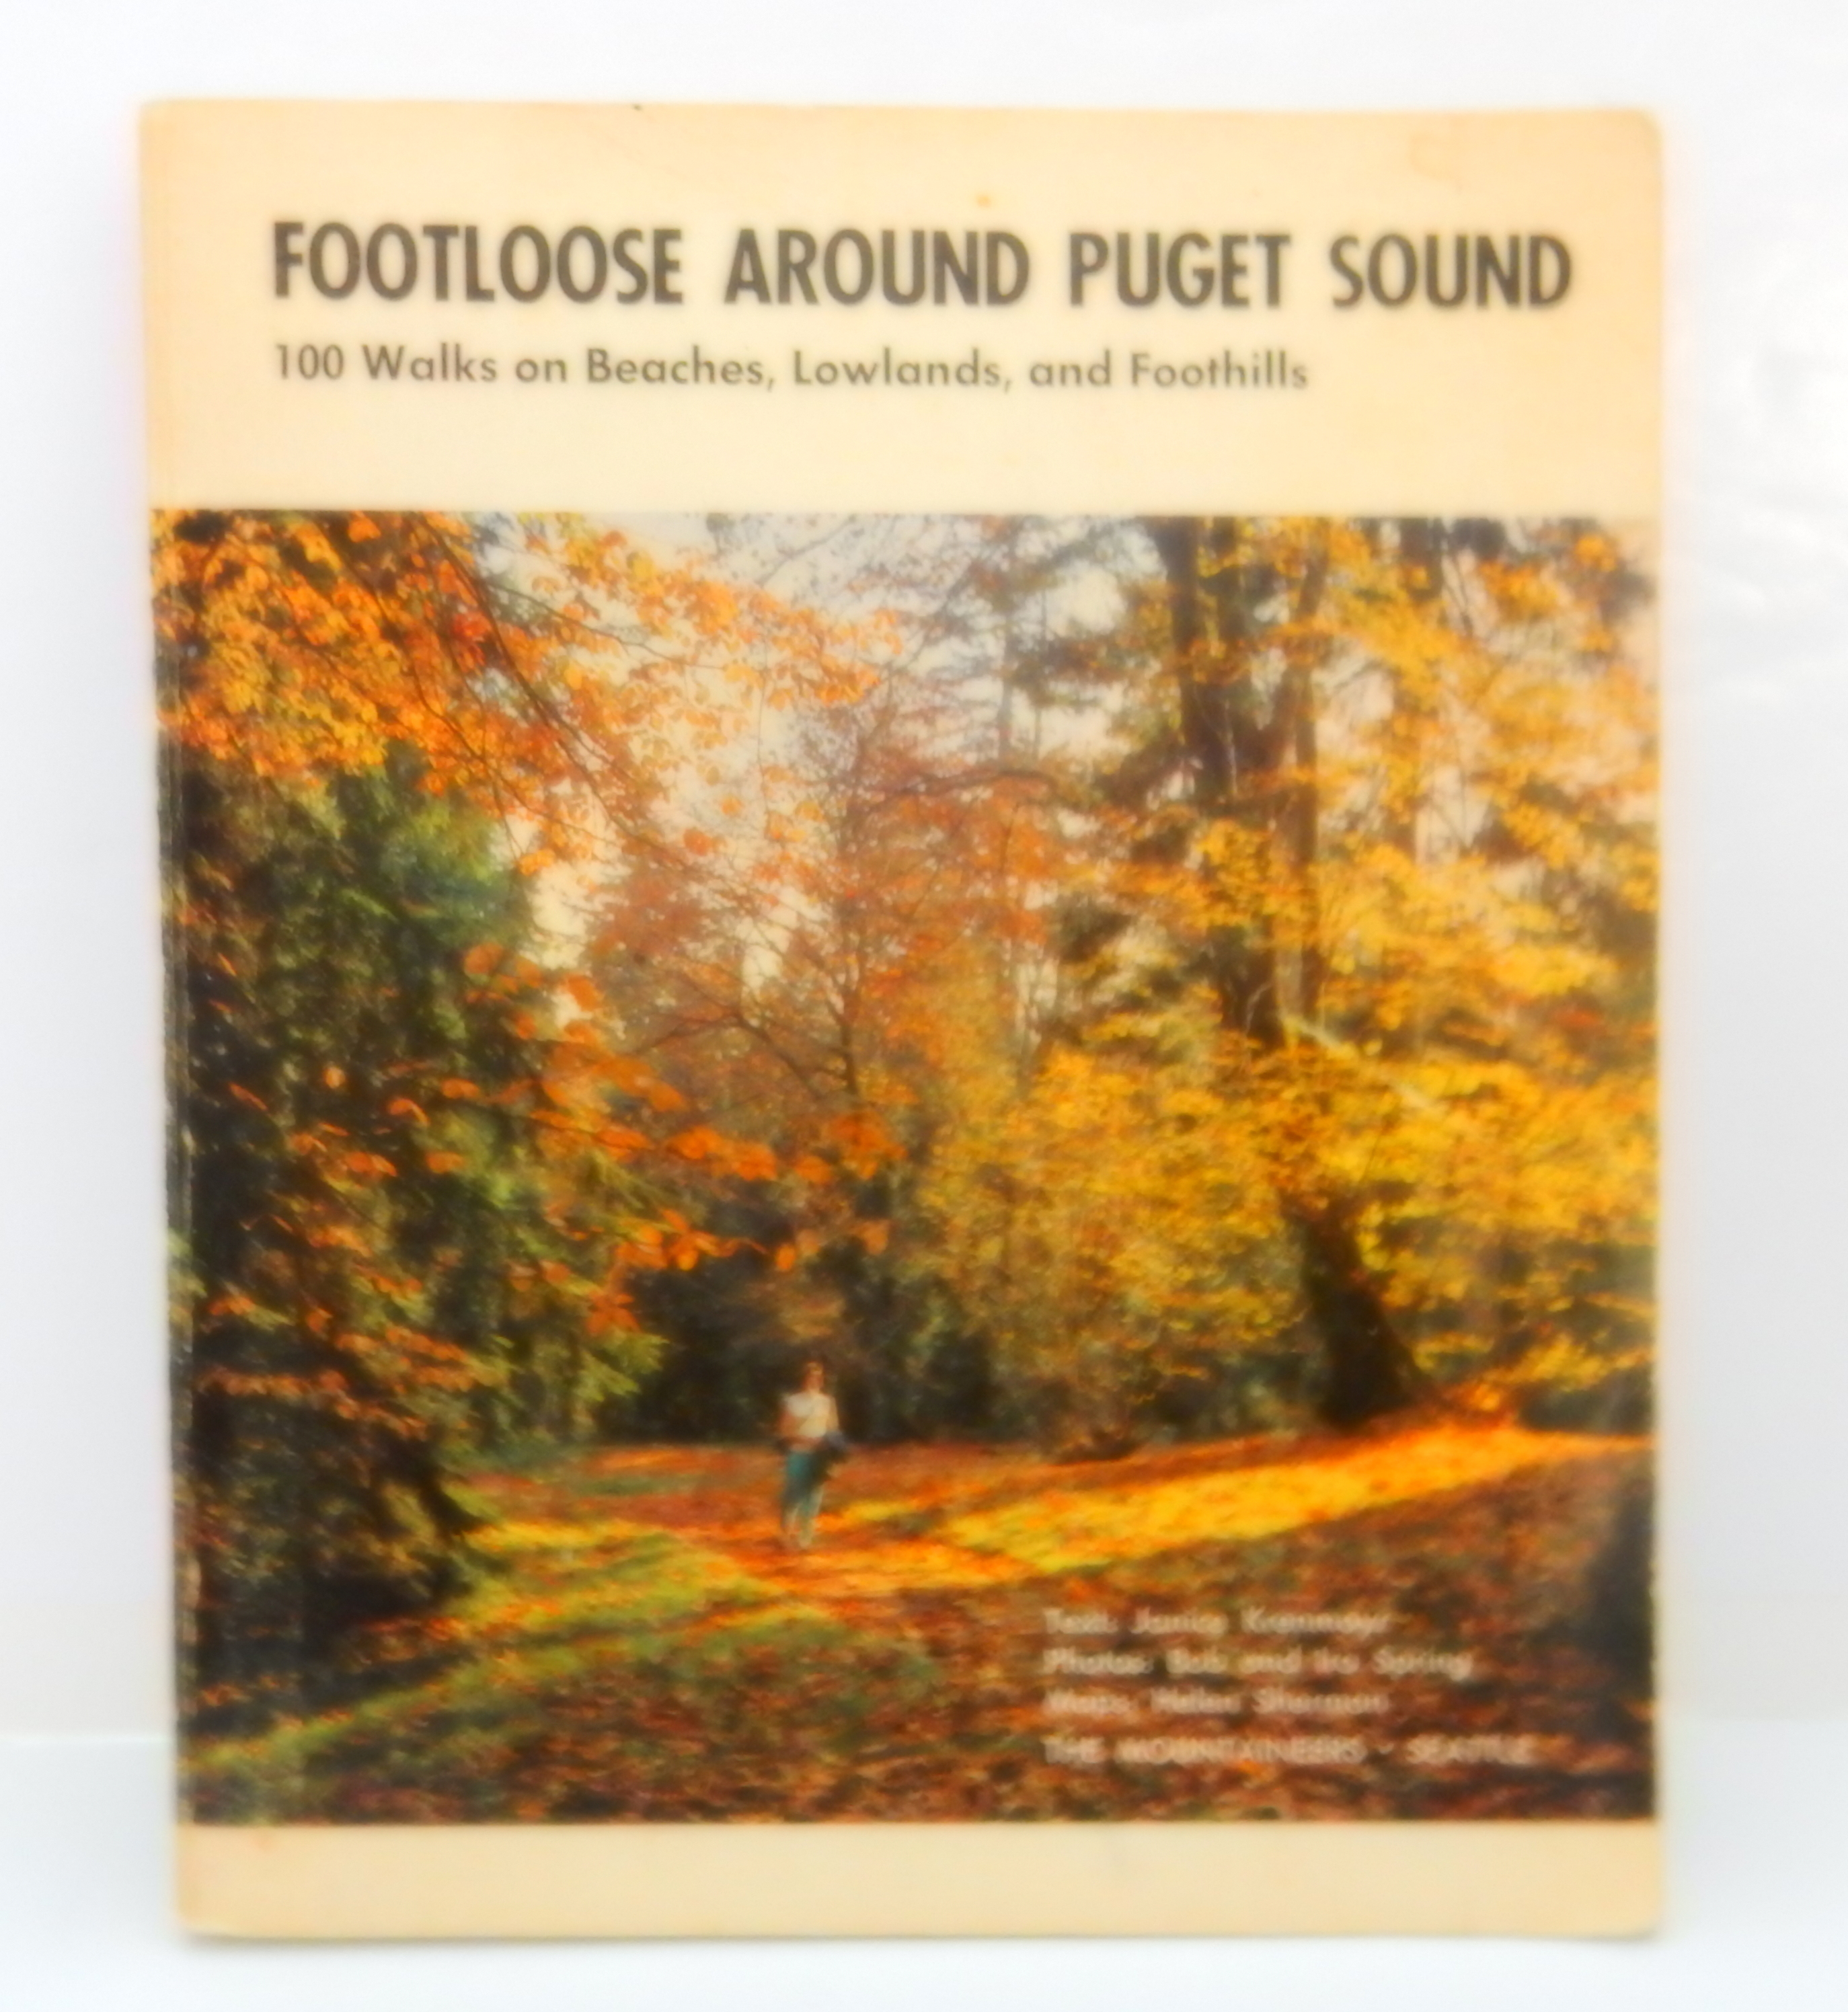 Footloose Around Puget Sound: 100 Walks on Beaches, Lowlands, and Foothills - Krenmayr, Janice (Text); Spring, Bob and Ira (Photos); Sherman, Helen (Maps)